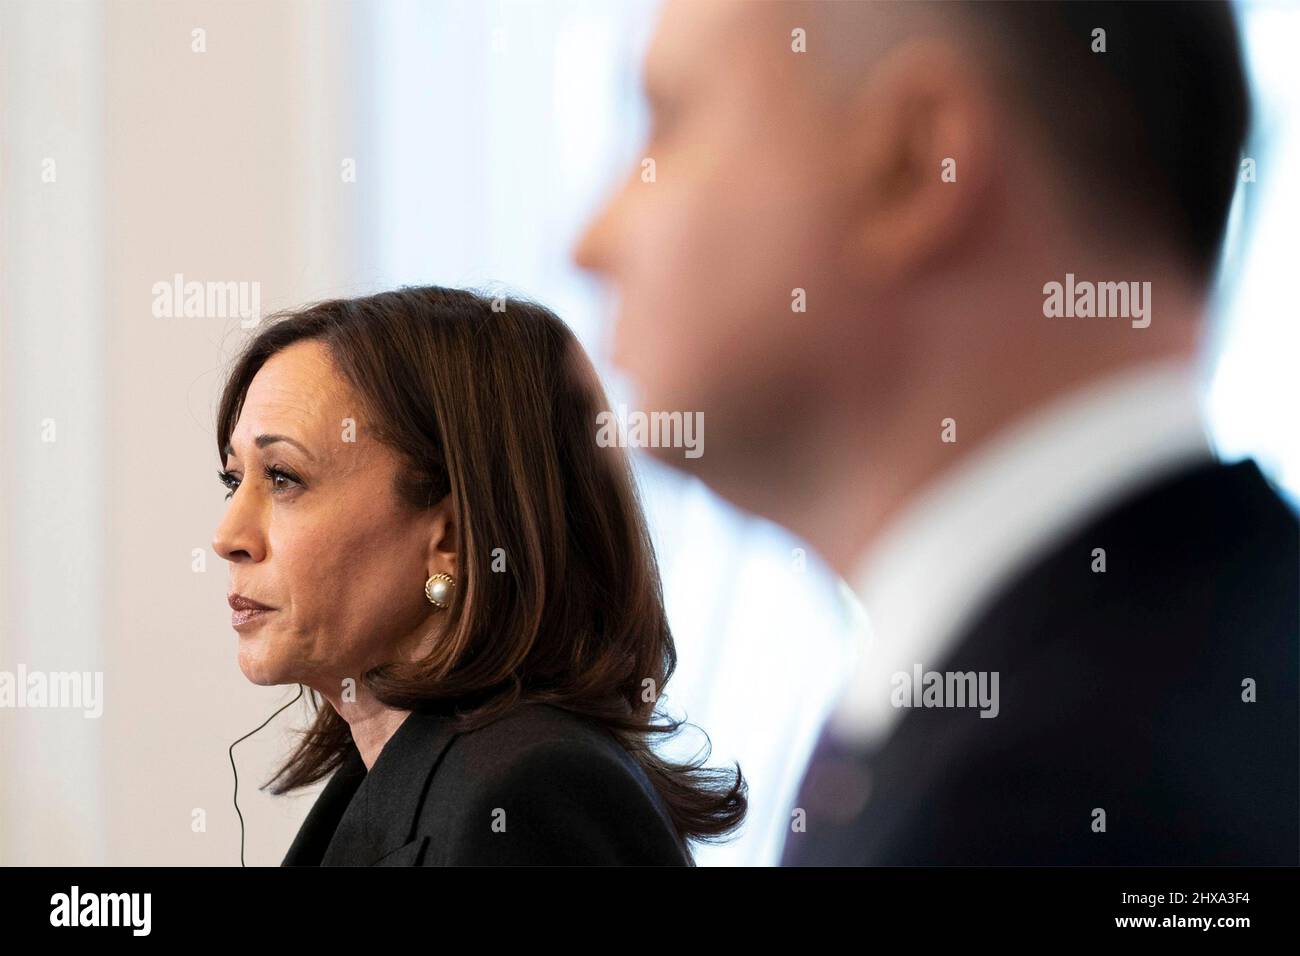 Warsaw, Poland. 10th Mar, 2022. U.S Vice President Kamala Harris, during a joint press conference with Polish President Andrzej Duda, right, at Belwelder Palace, March 10, 2022 in Warsaw, Poland. Harris is in Poland to discuss the Ukraine crisis with NATO allies. Credit: Lawrence Jackson/White House Photo/Alamy Live News Stock Photo